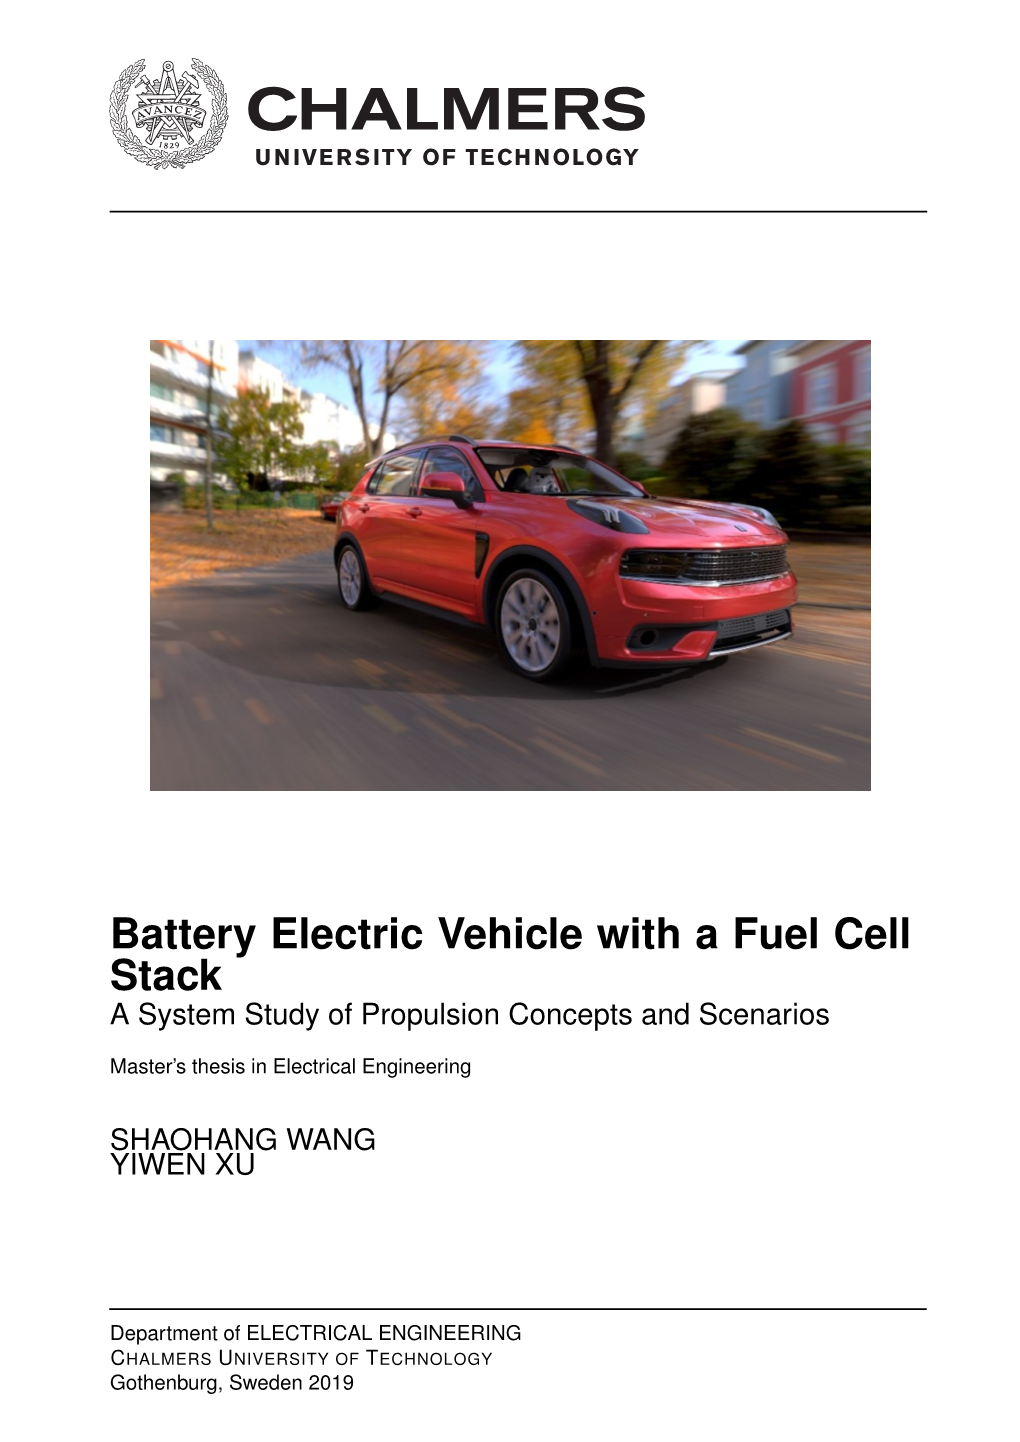 Battery Electric Vehicle with a Fuel Cell Stack a System Study of Propulsion Concepts and Scenarios